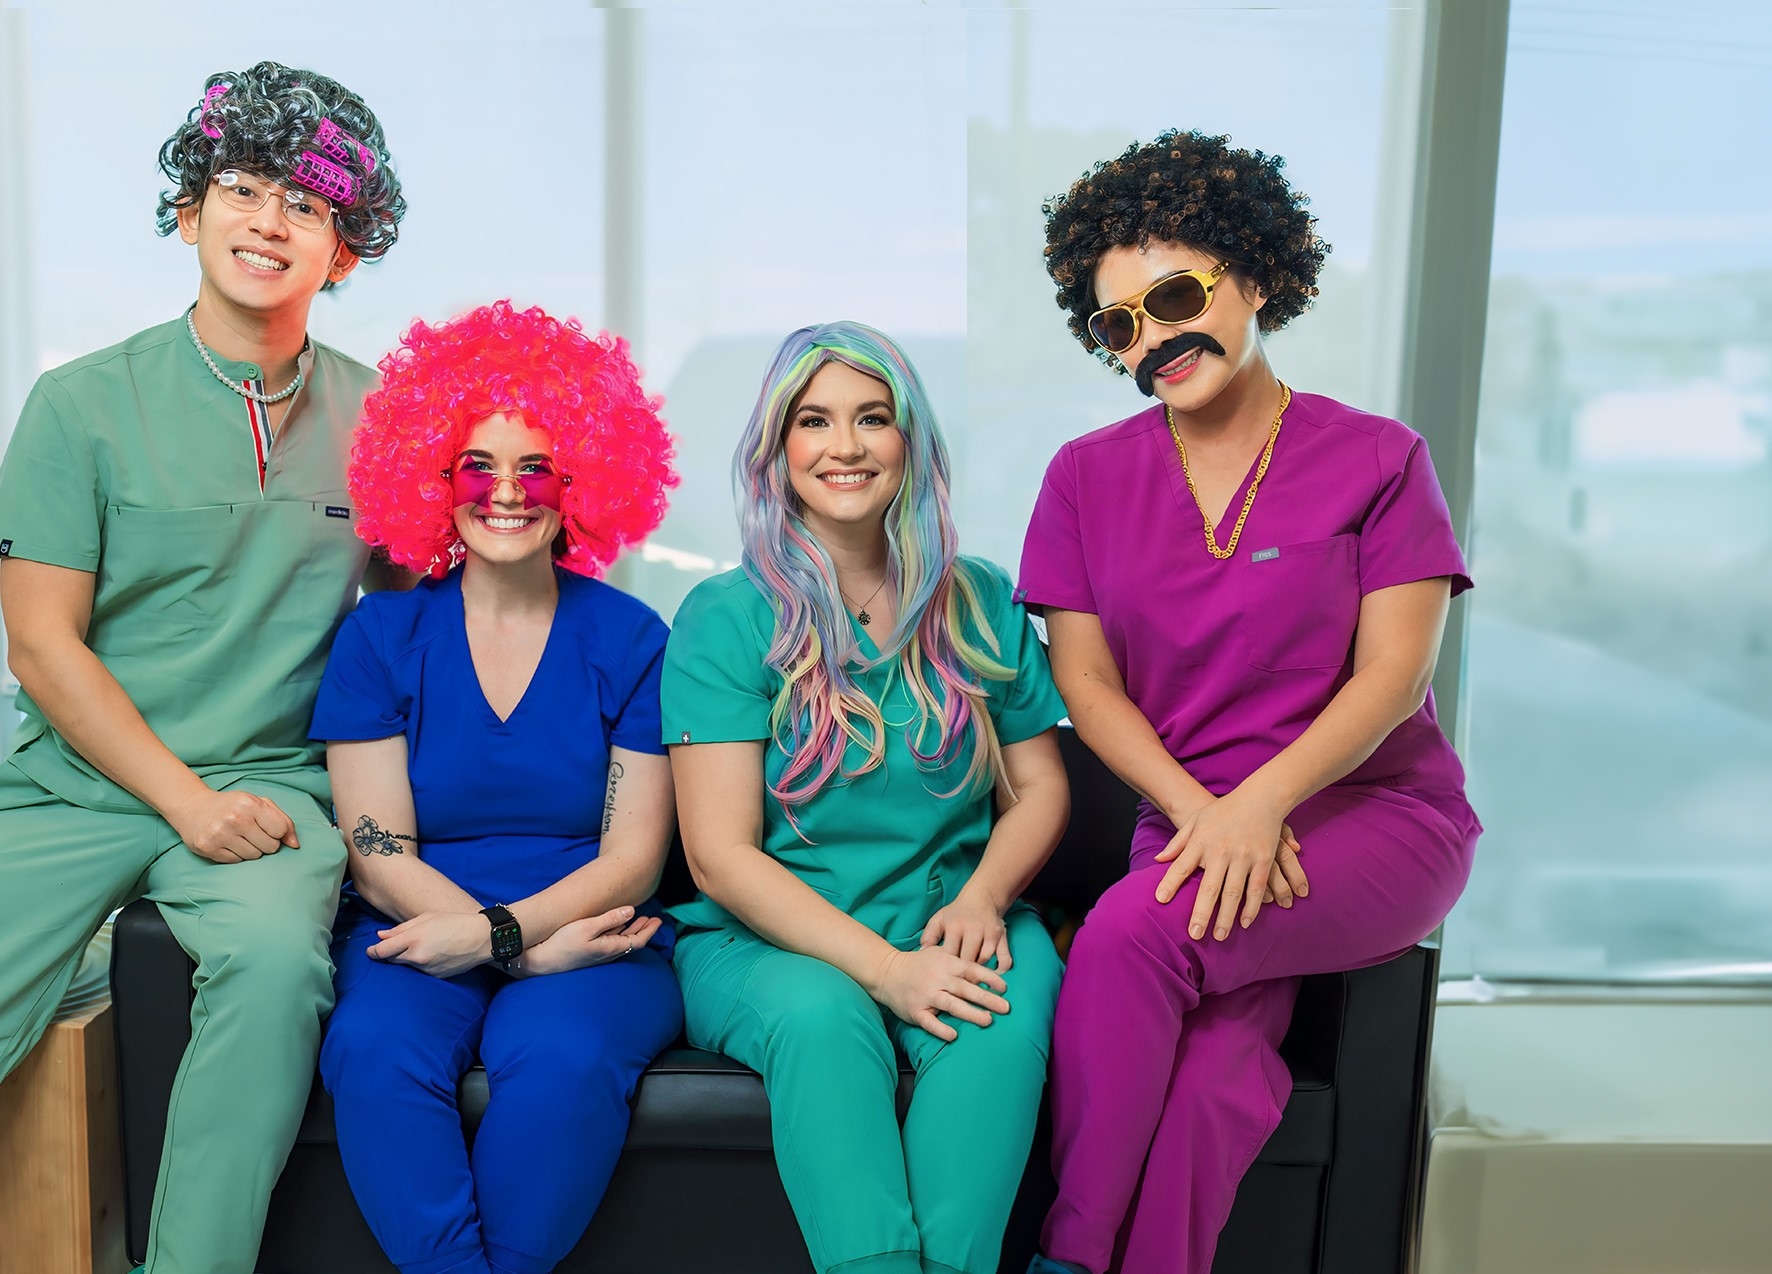 Bloom Pediatric Dentistry team wearing silly glasses and wigs